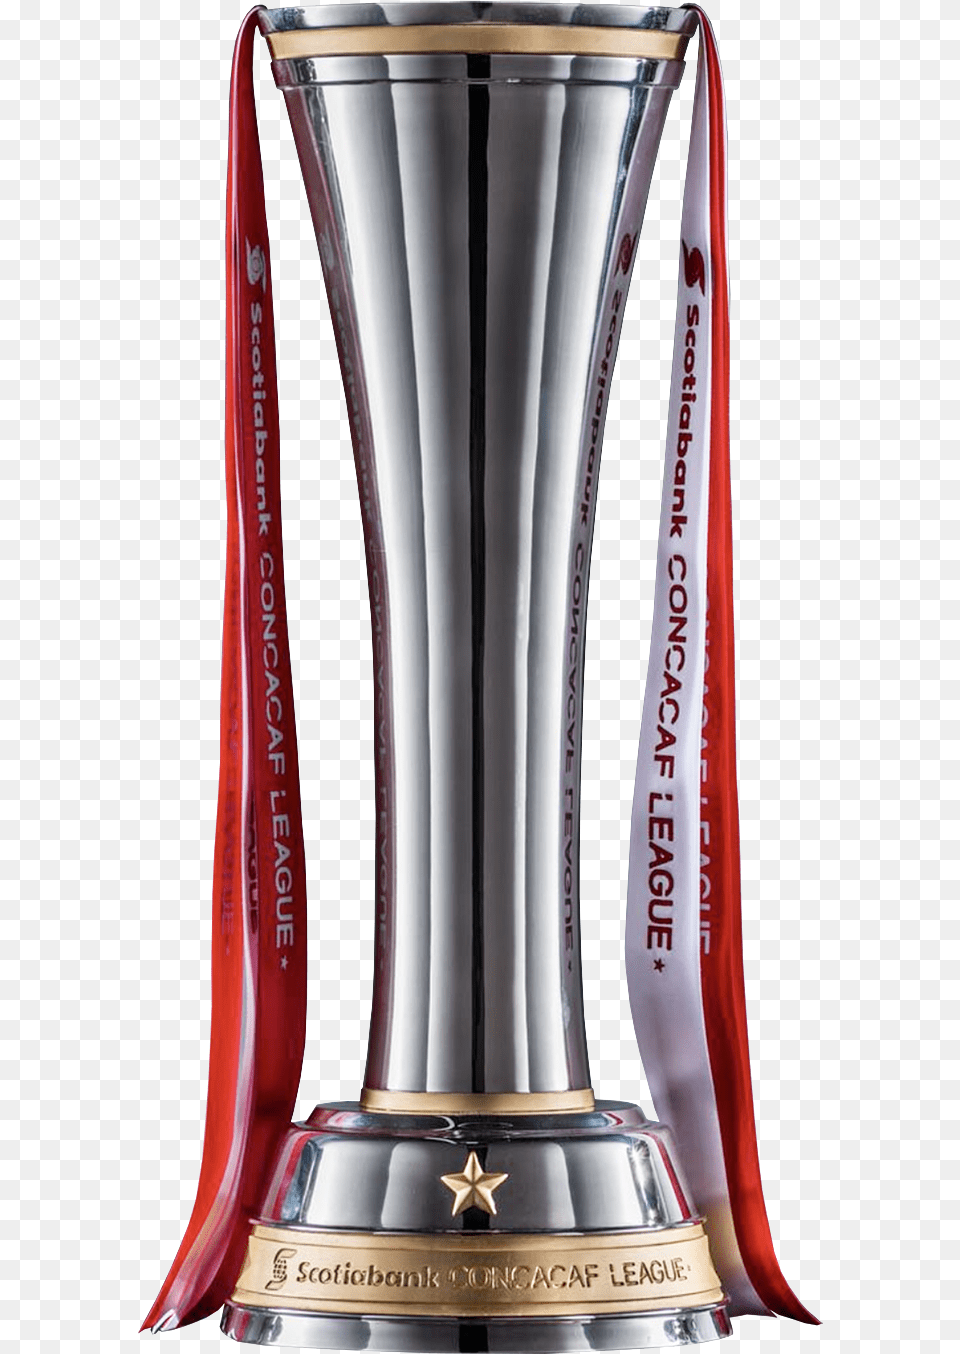 Concacaf League Trophy, Smoke Pipe Free Png